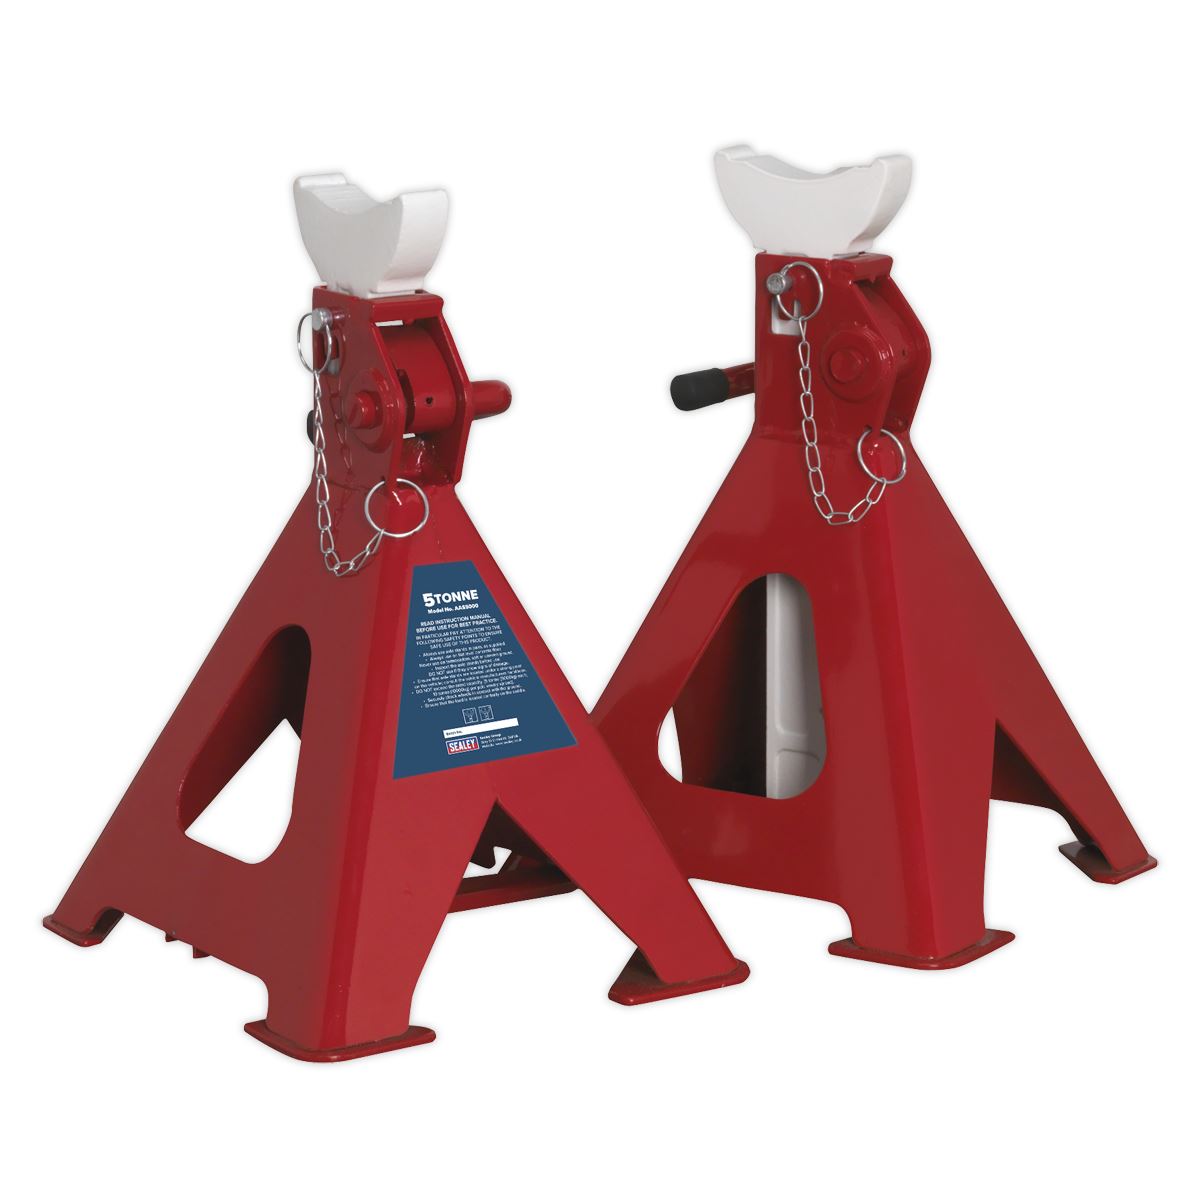 Sealey Auto Rise Ratchet Axle Stands (Pair) 5 Tonne Capacity per Stand